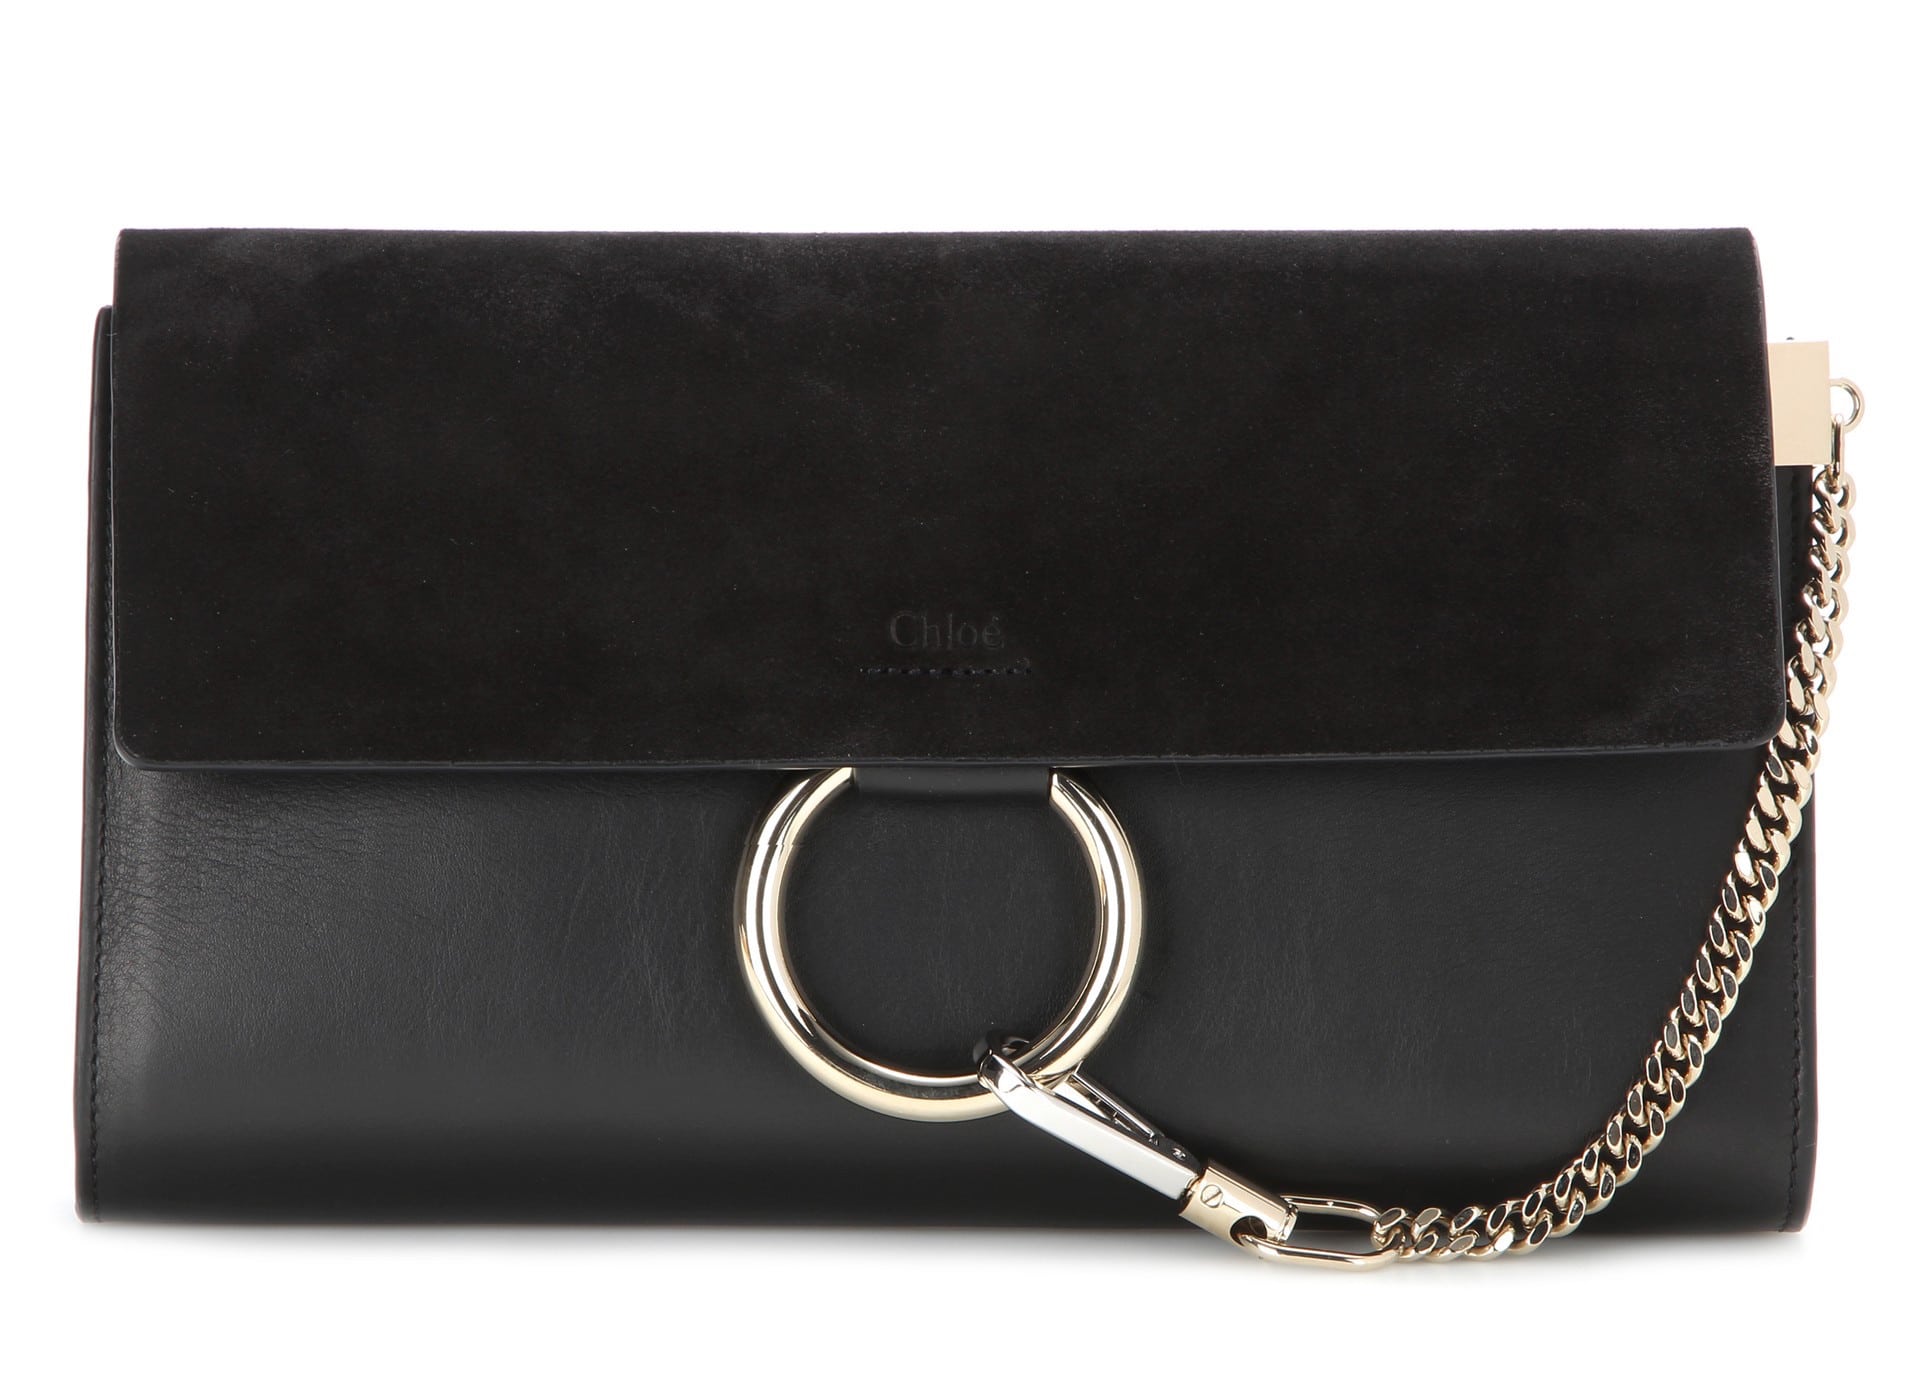 Chloe Faye Suede And Leather Clutch Bag